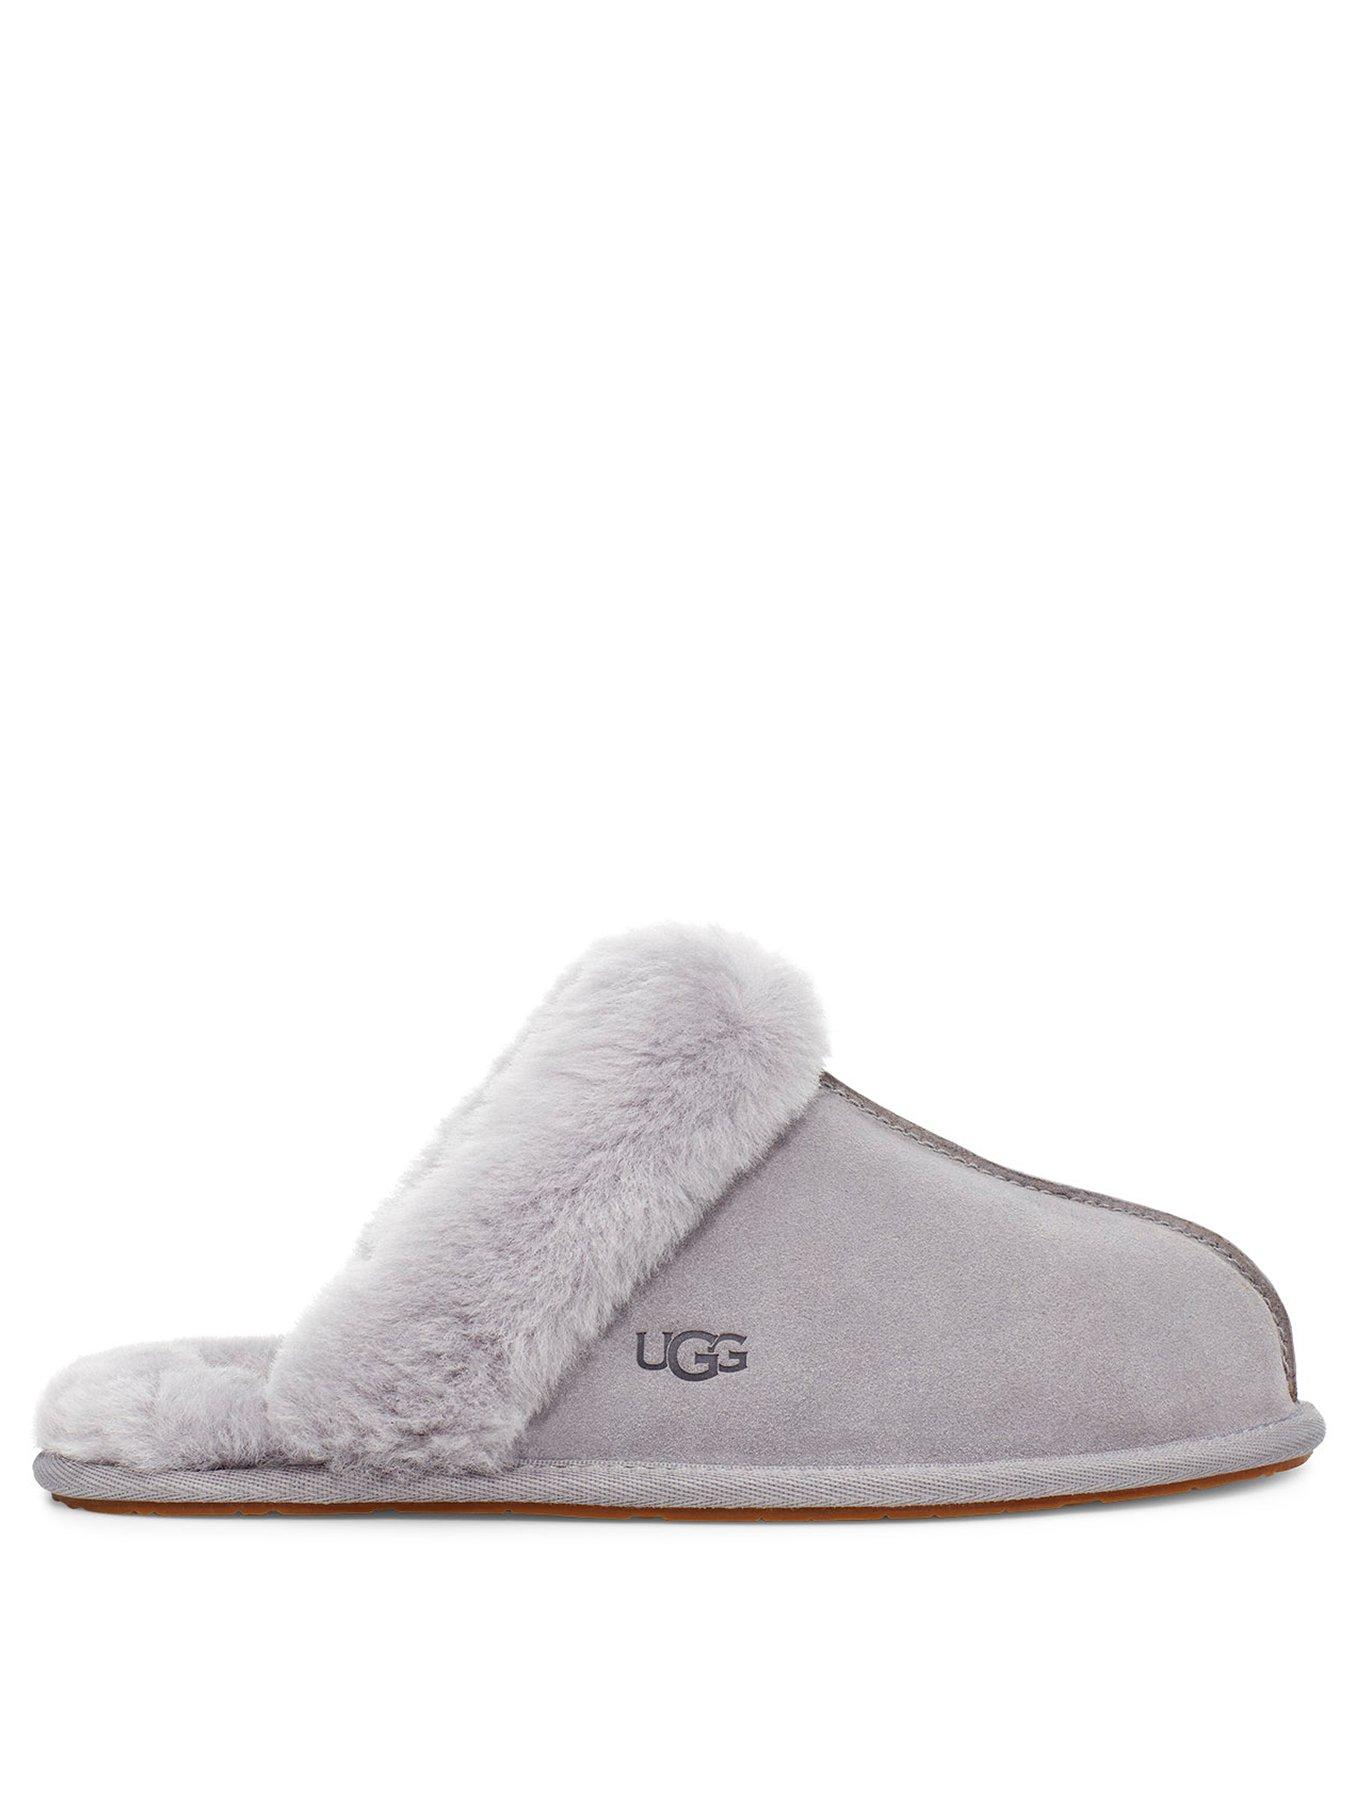 ugg slippers lime green